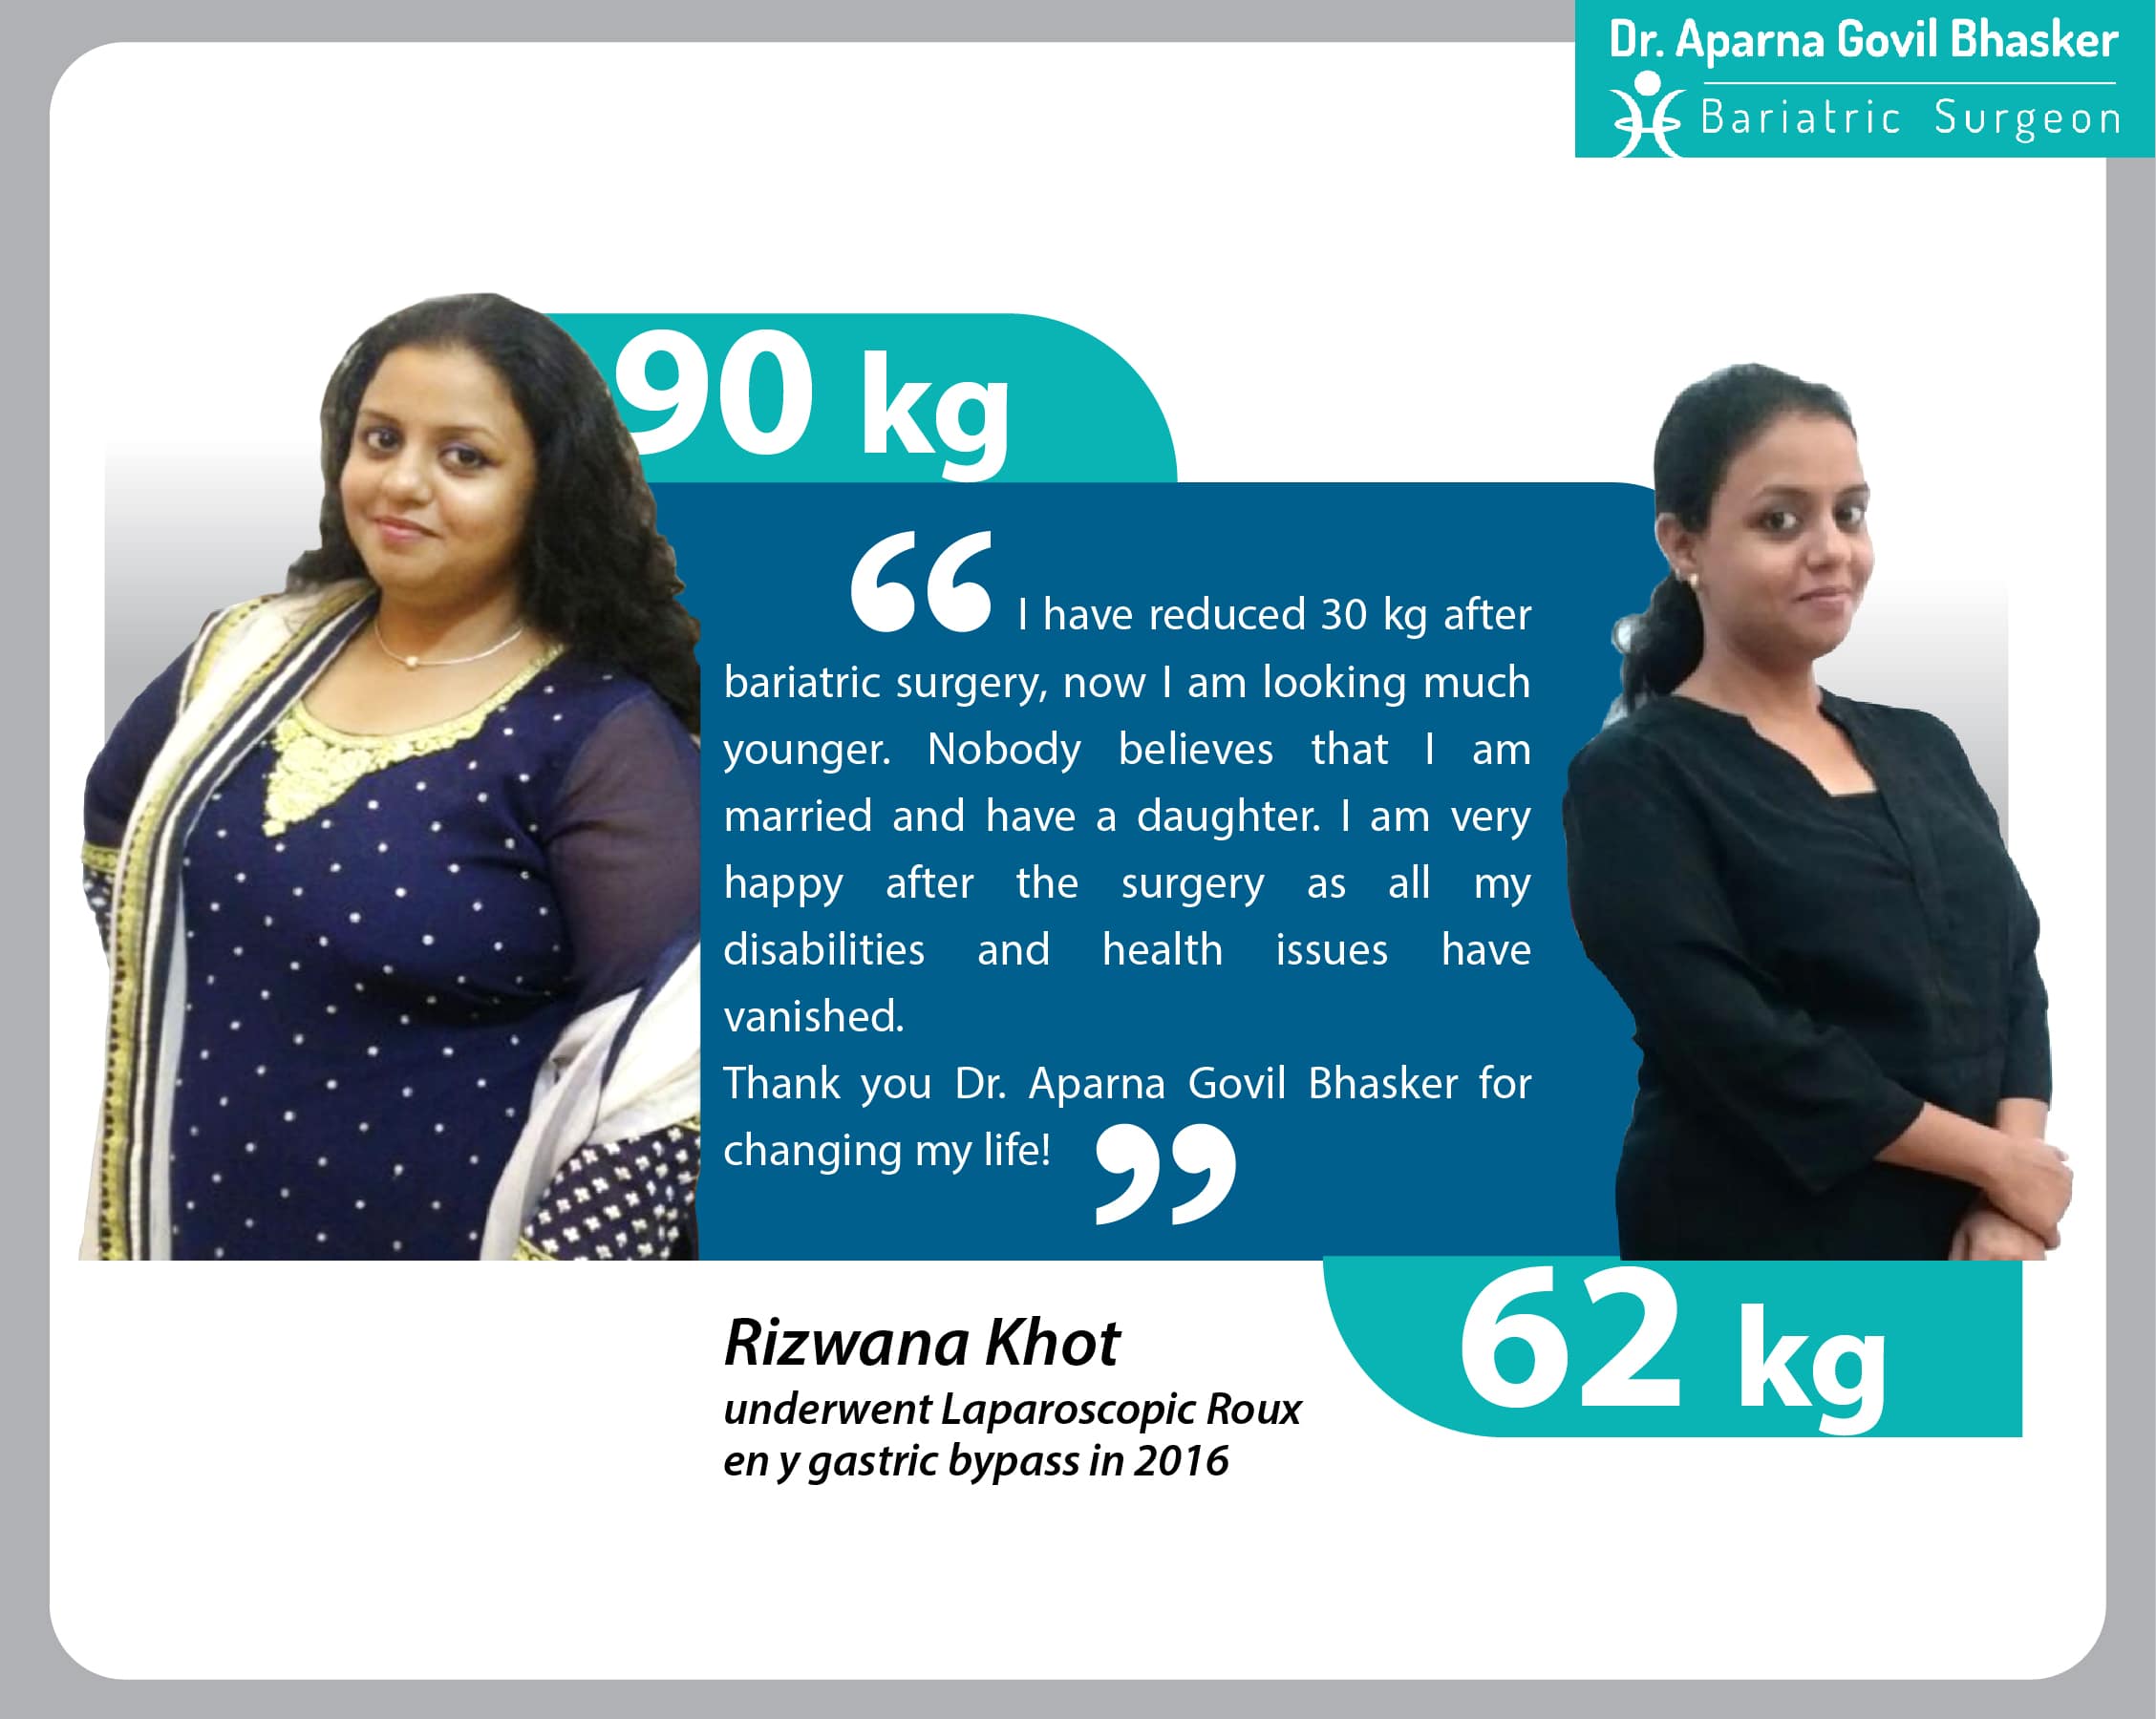 best Single Incision Sleeve Gastrectomy bariatric surgery and weight loss surgery cost in mumbai india before after photos (11)